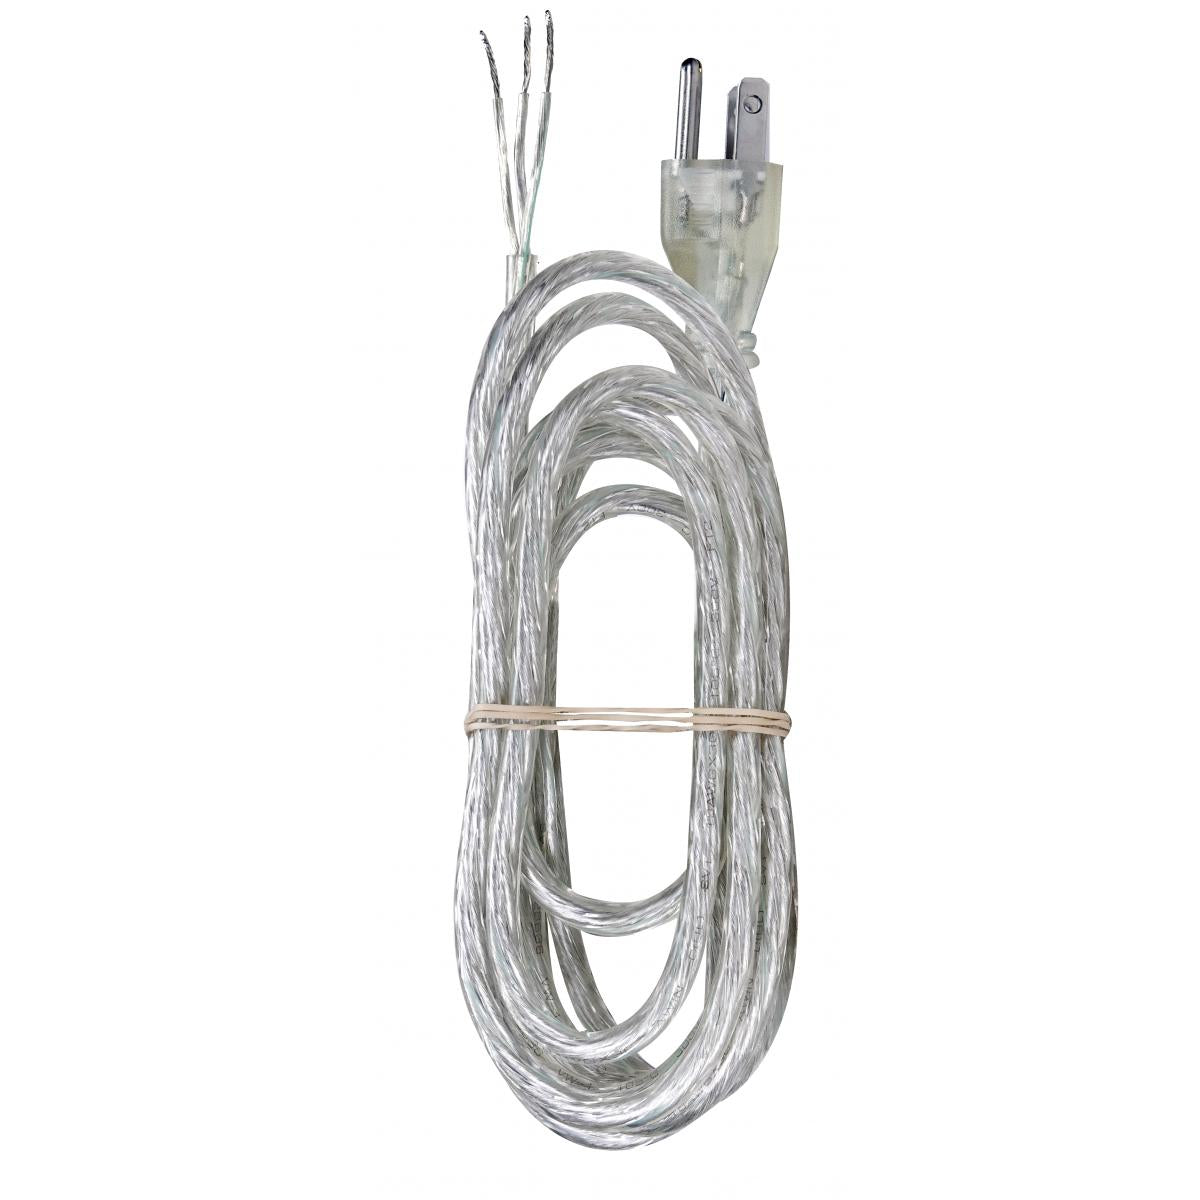 Satco 90-2403 8 Foot 18/3 SVT 105C Heavy Duty Cord Set Clear Silver Finish 100 Carton 3 Prong Molded Plug Stripped And Slit 1/4" Diameter